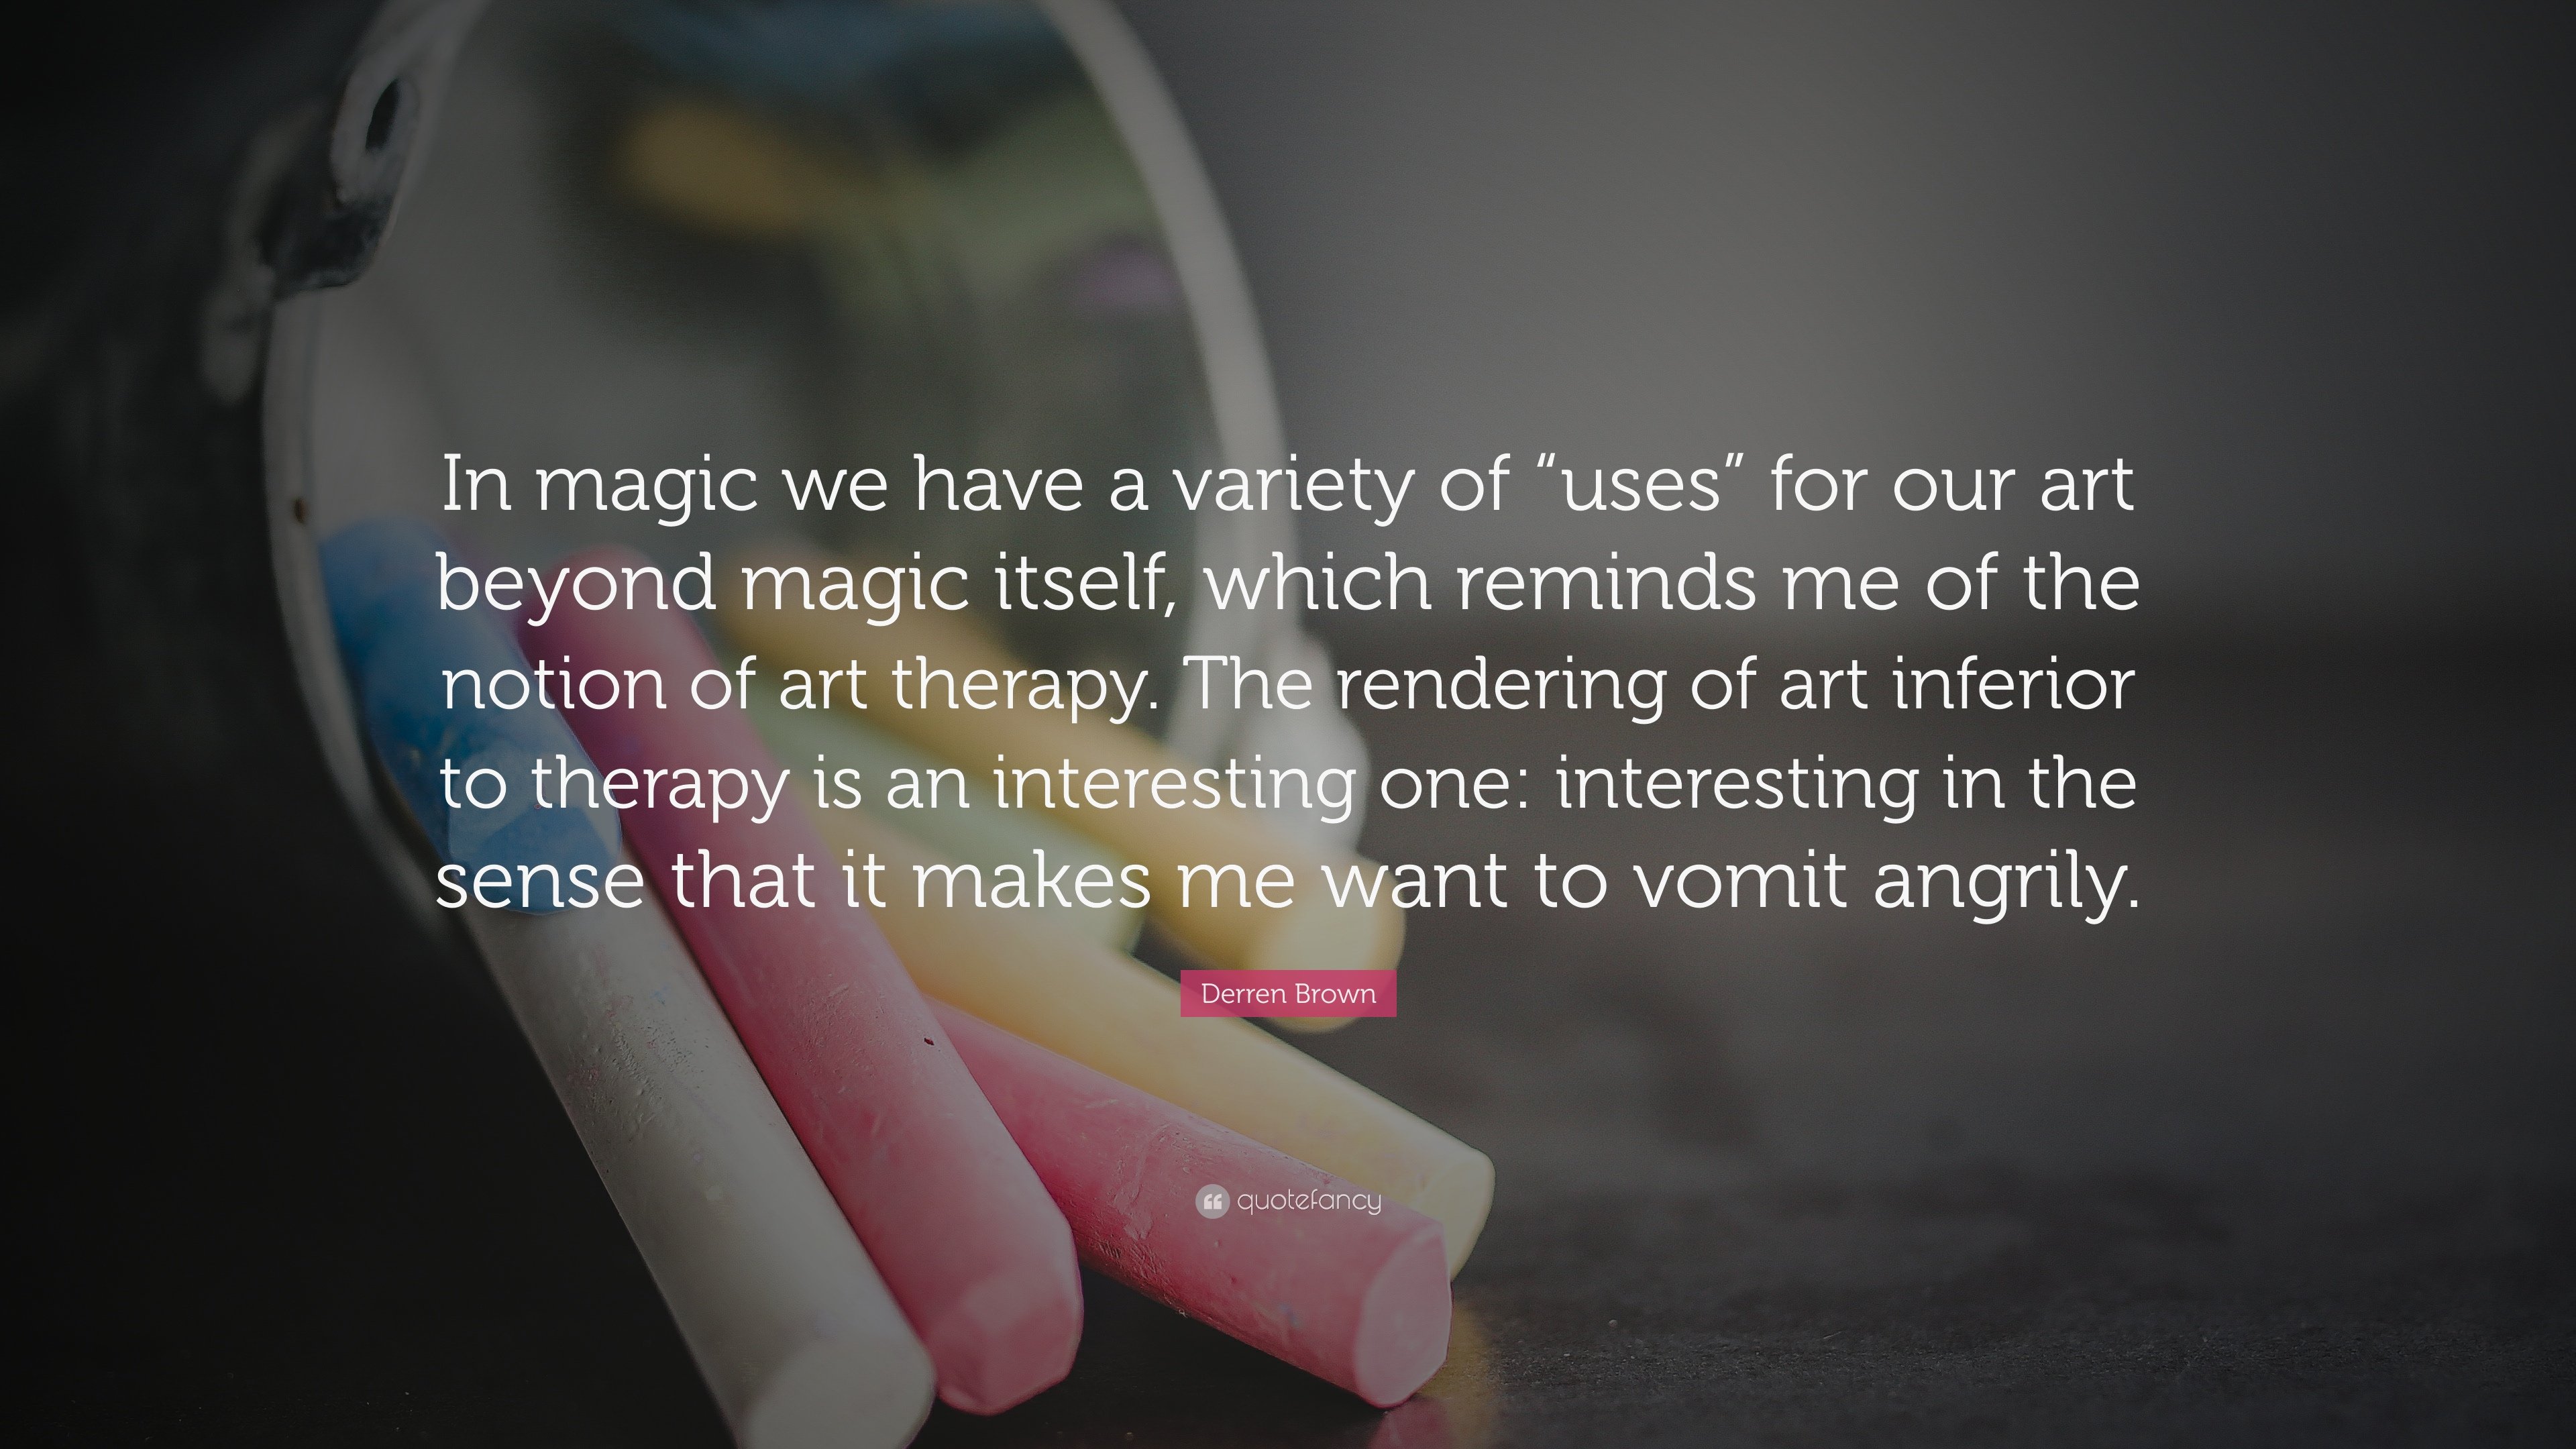 Derren Brown Quote: “In magic we have a variety of “uses” for our